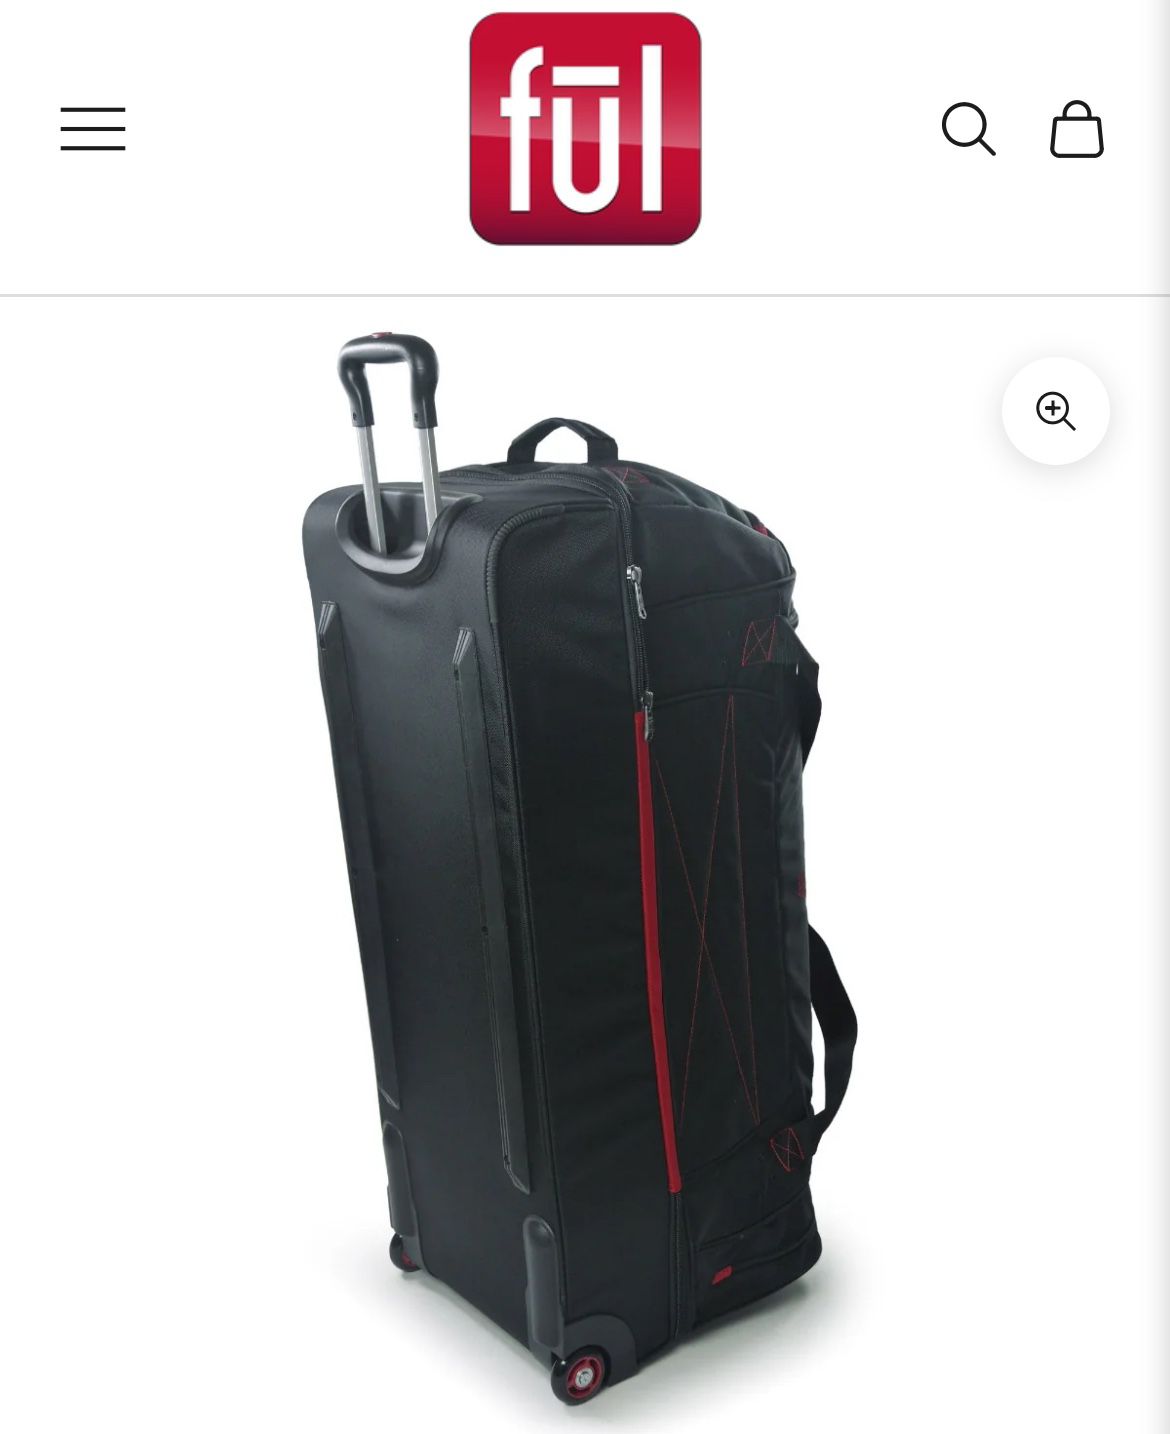 Ful  Tour Manager Rolling Duffle Bag